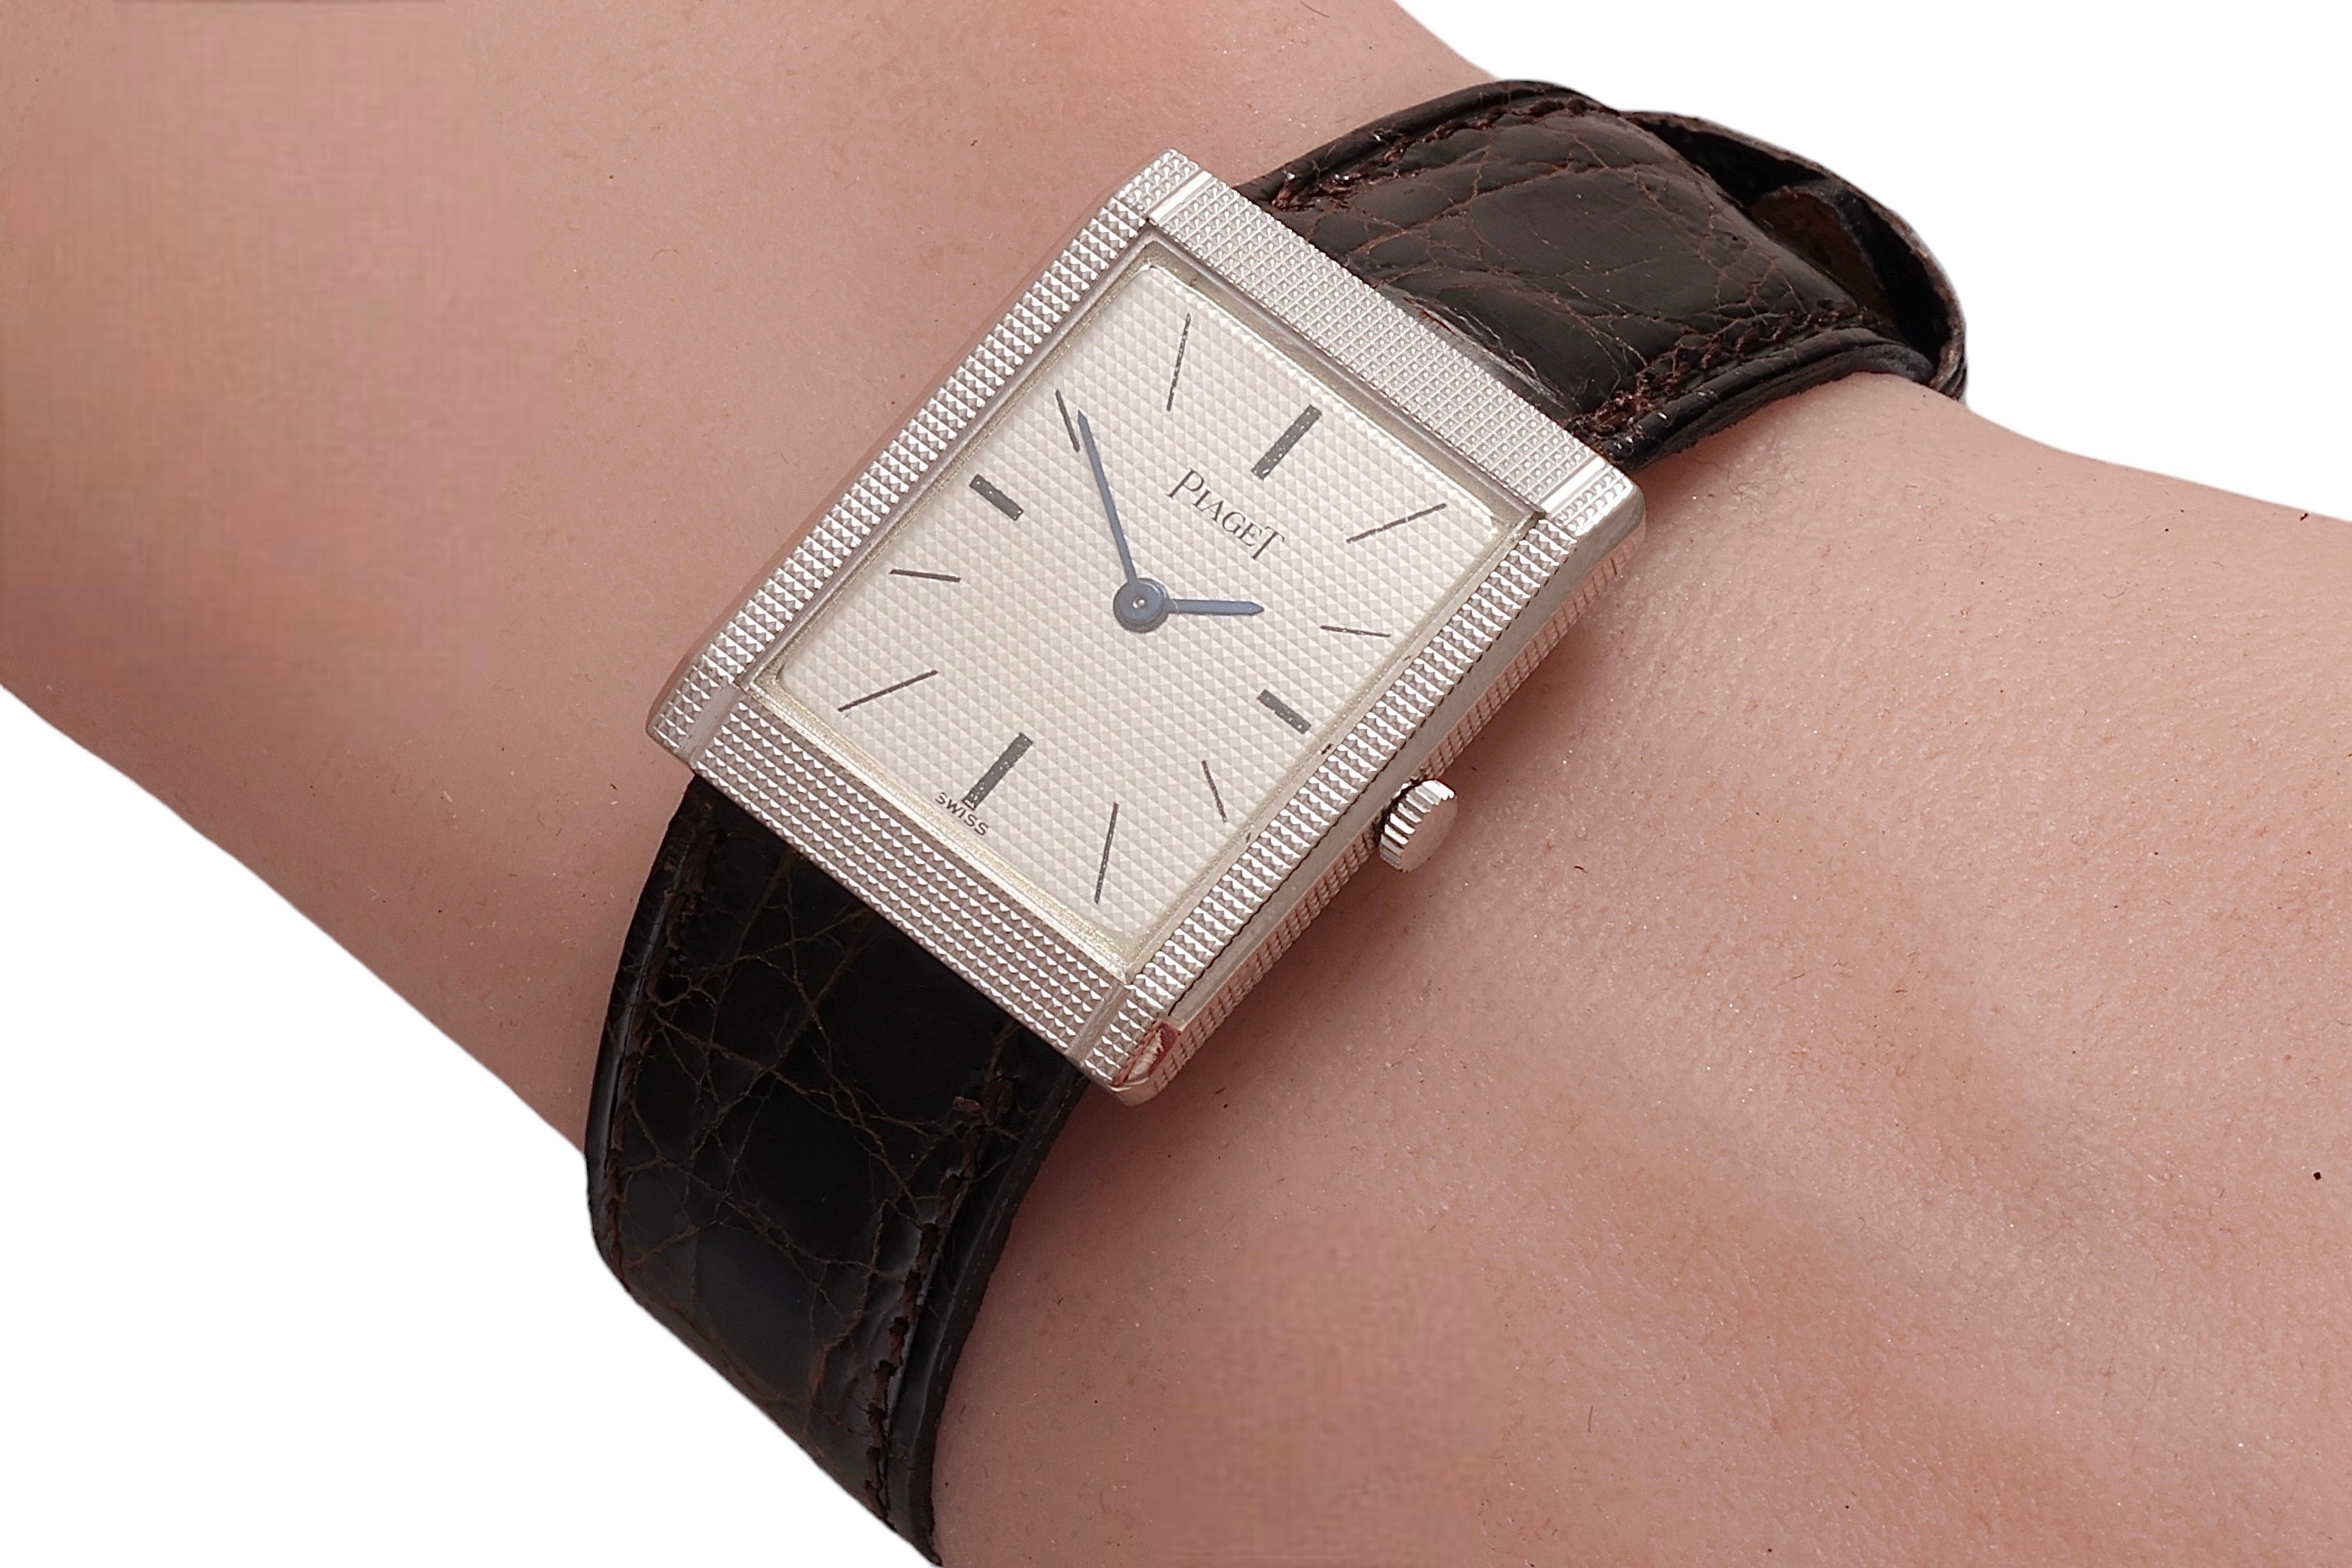 18 kt. White Gold Piaget Wrist Watch, Manual Winding Ultra Thin, Collectors For Sale 2